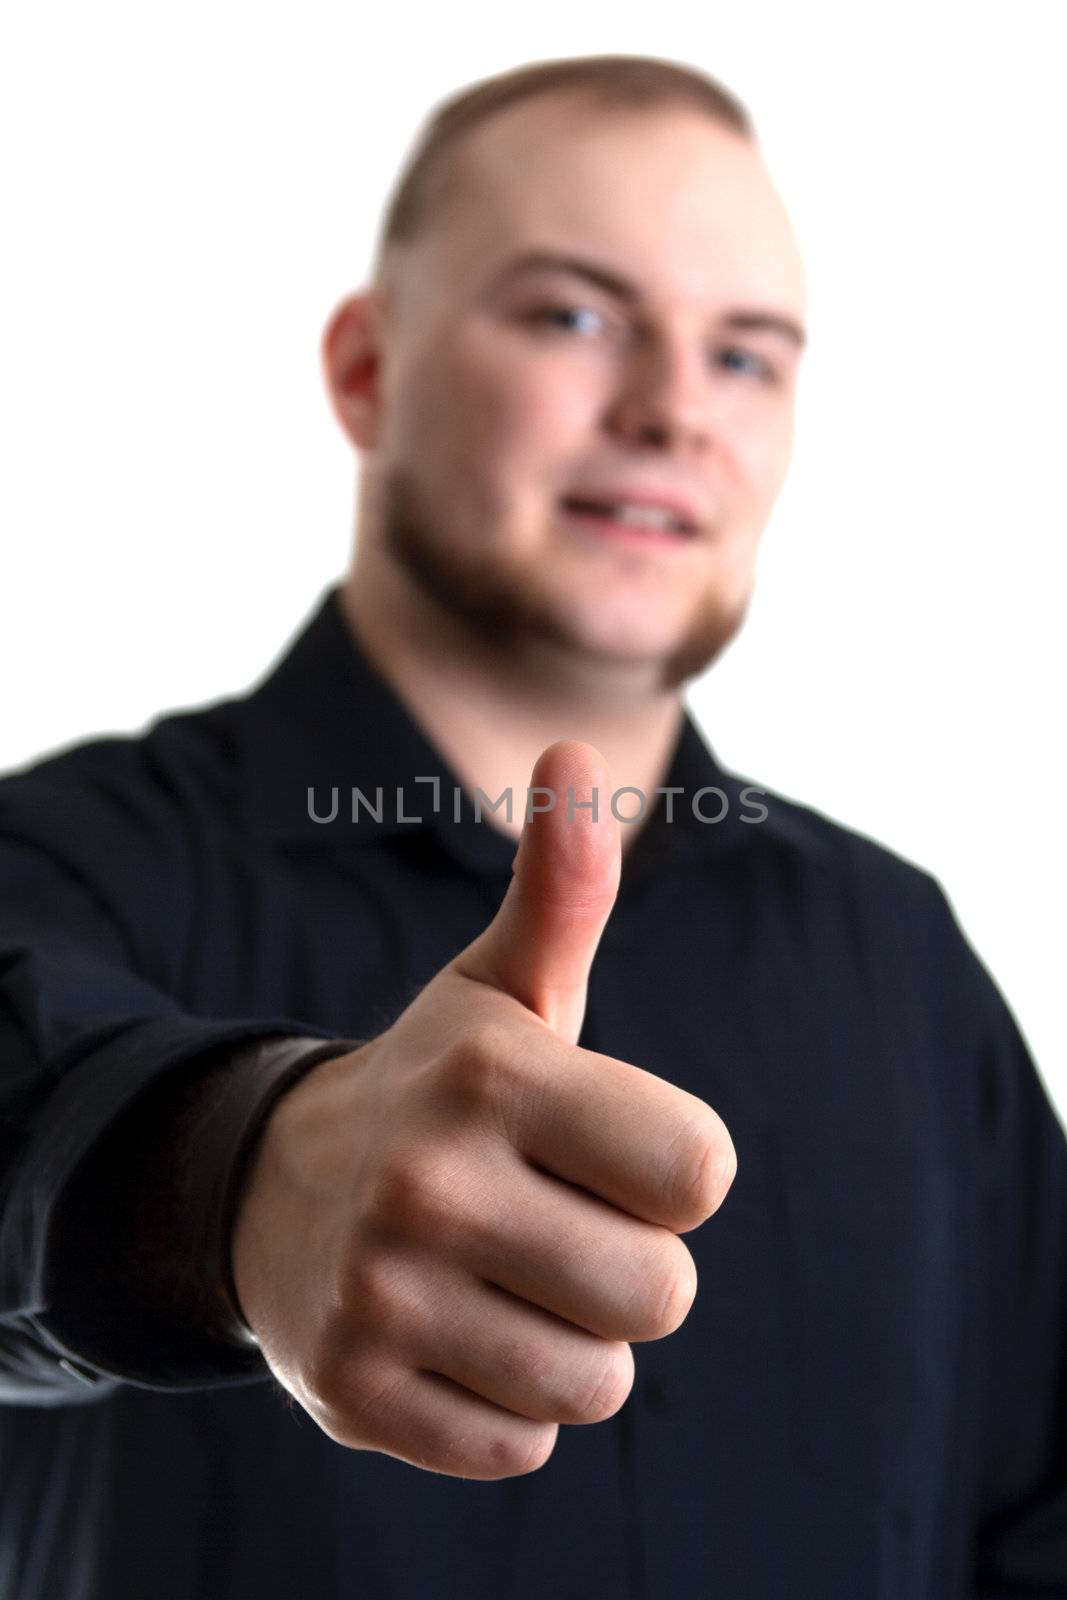 young man with blue eyes gives the thumbs up gesture on white background - Focus on his thumb 